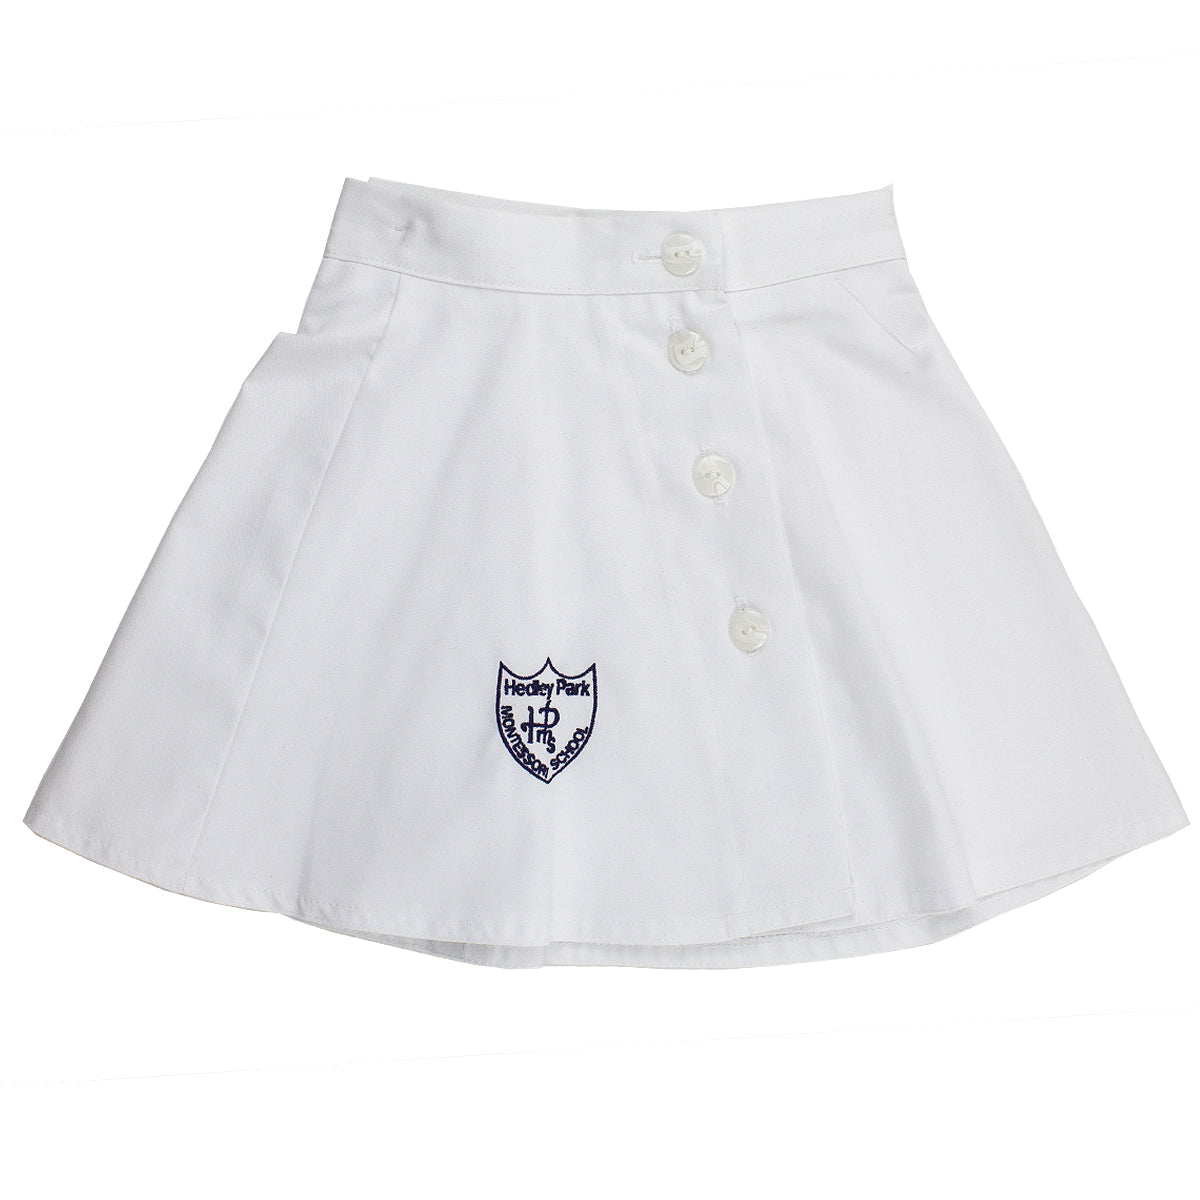 A photo of the Hedley Park Tennis Skirt in White with embroidered School Crest on the bootm center of the skirt